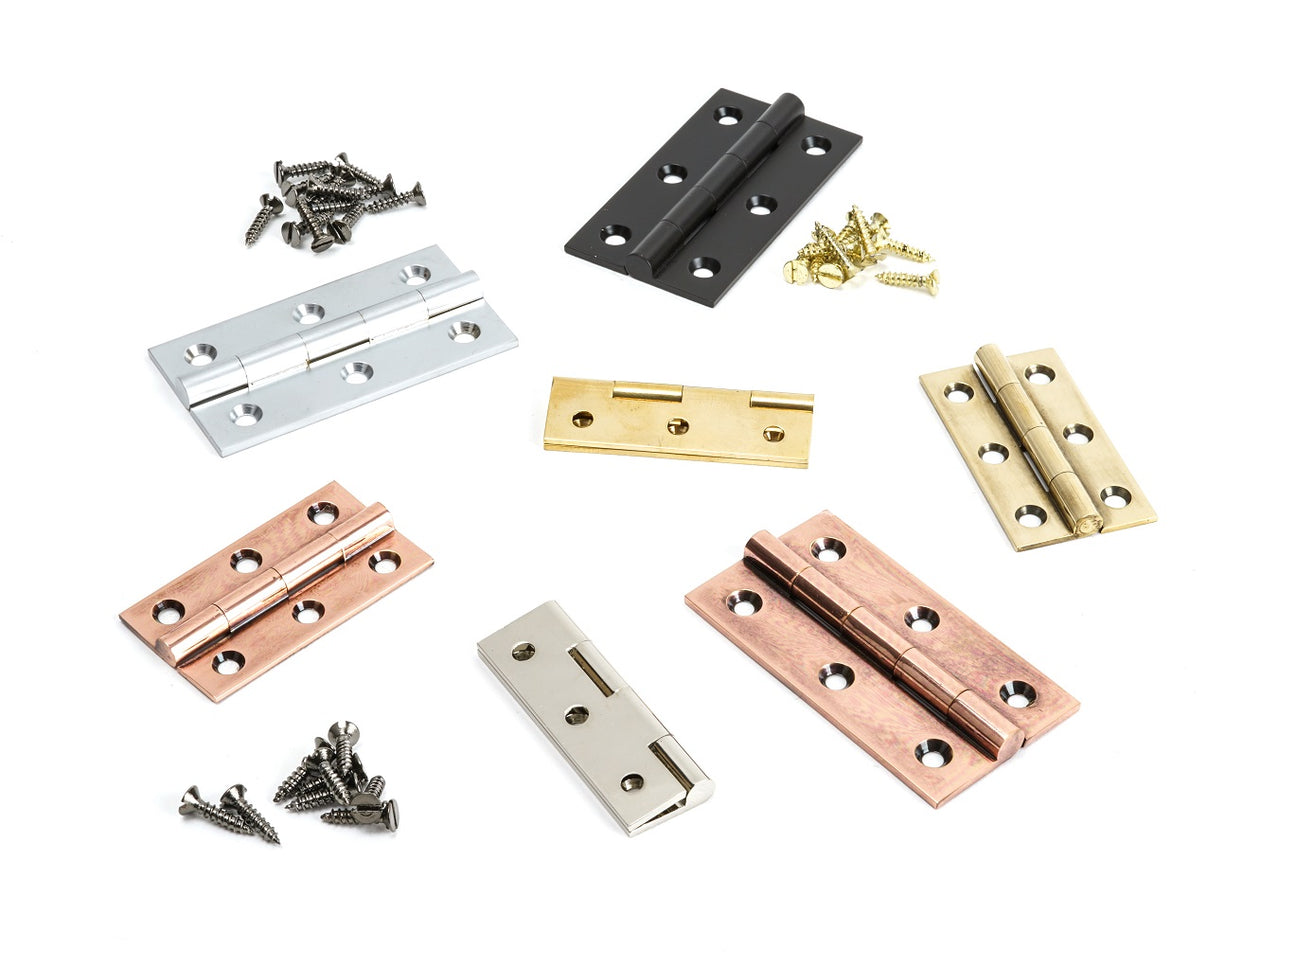 Image showing a range of cabinet hinges made by From the Anvil